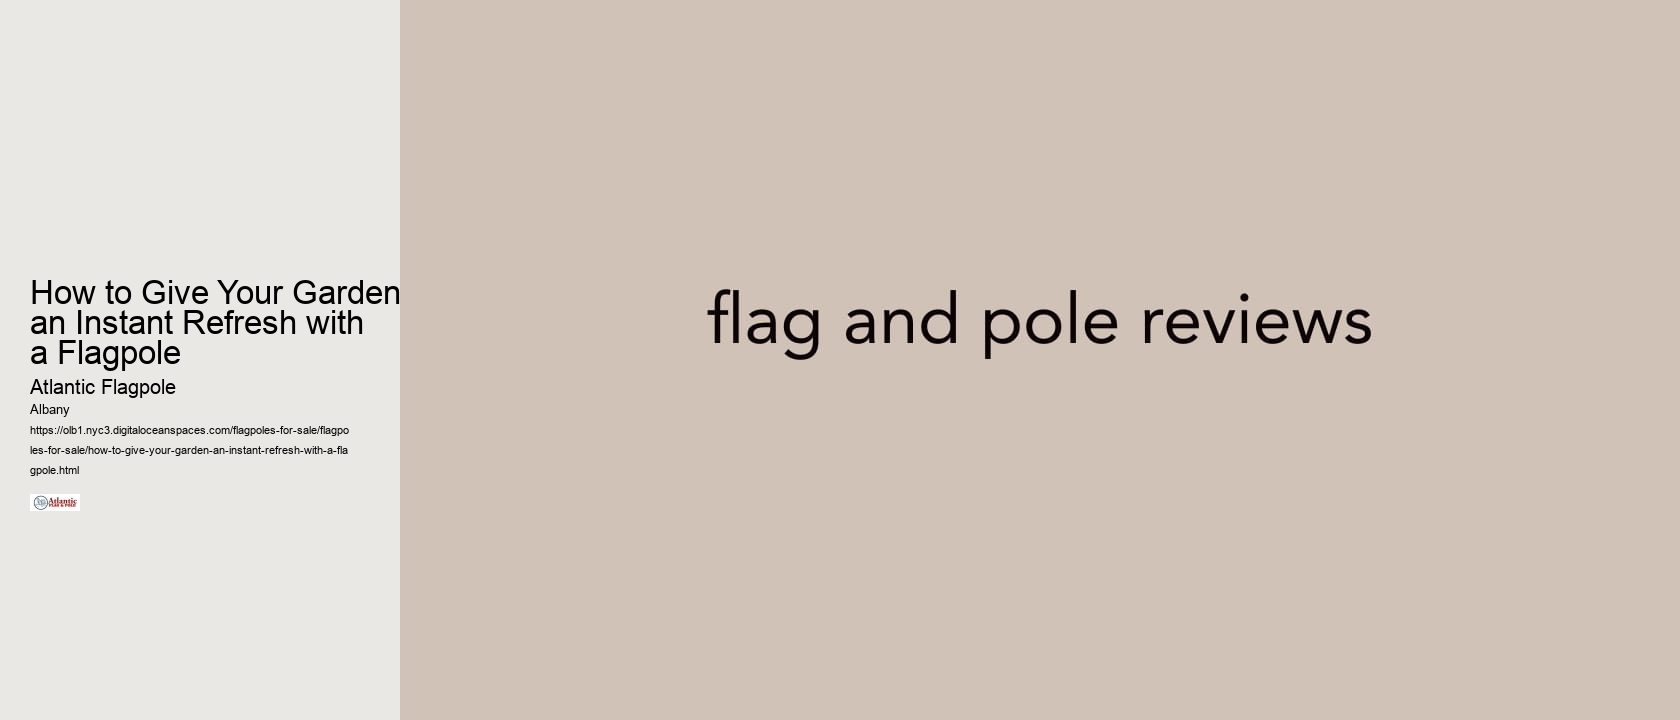 How to Give Your Garden an Instant Refresh with a Flagpole